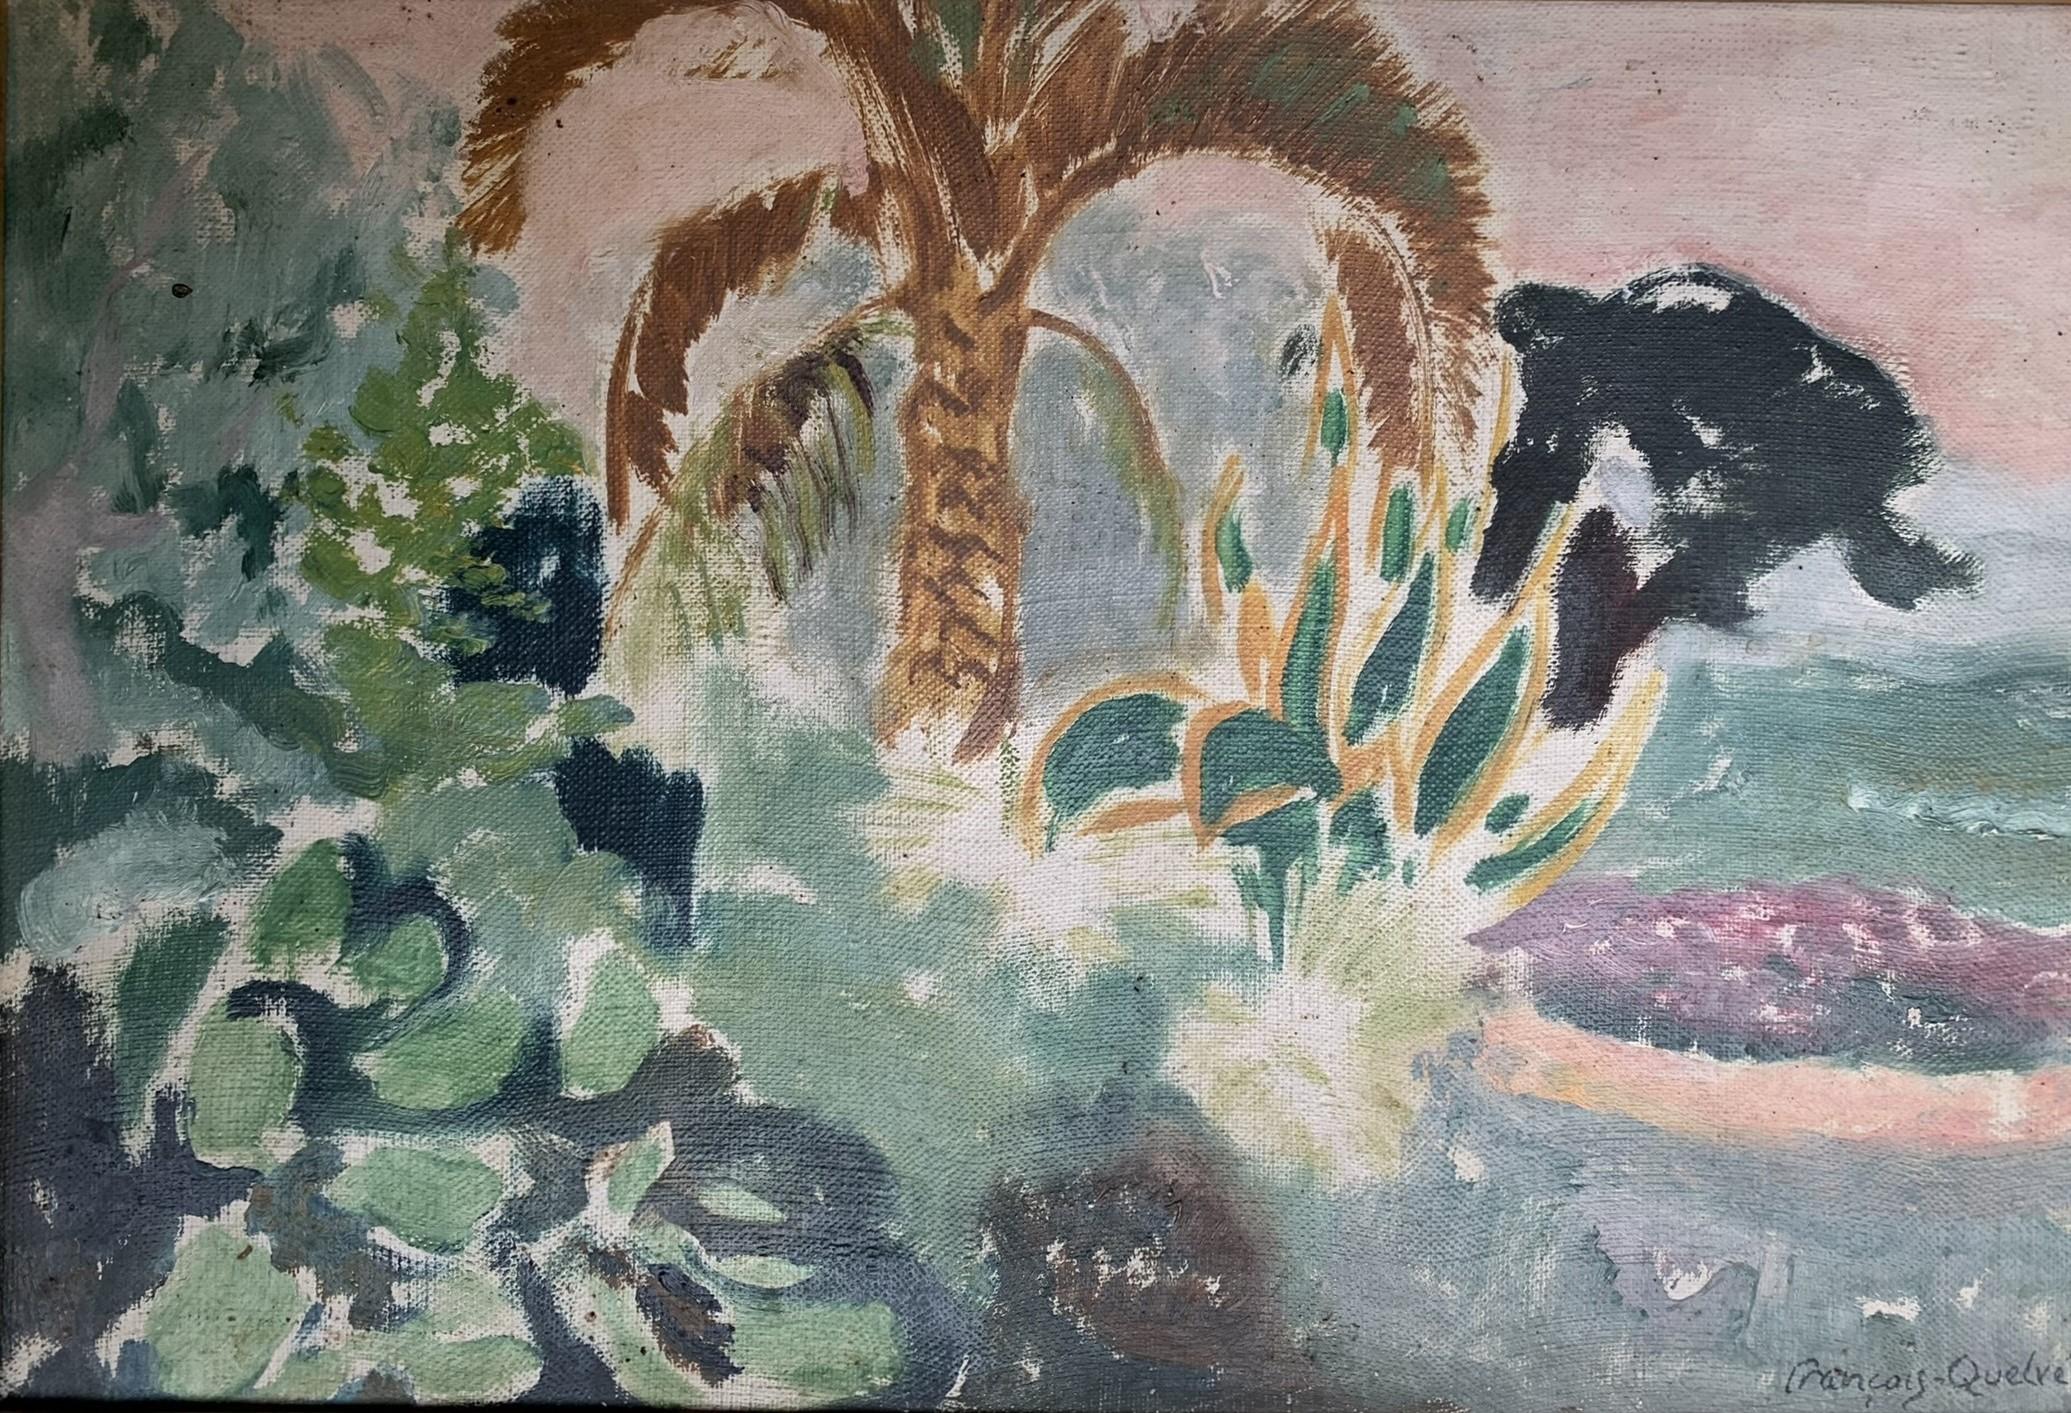 Landscape with palm trees.  François QUELVÉE (1884-1967)
Probably painted in Cannes.
Signed lower right. 
Oil on canvas.
In XX century frame.
Vibrant and a beautiful freedom of execution, with happy and colourful composition, that reveals symbolist